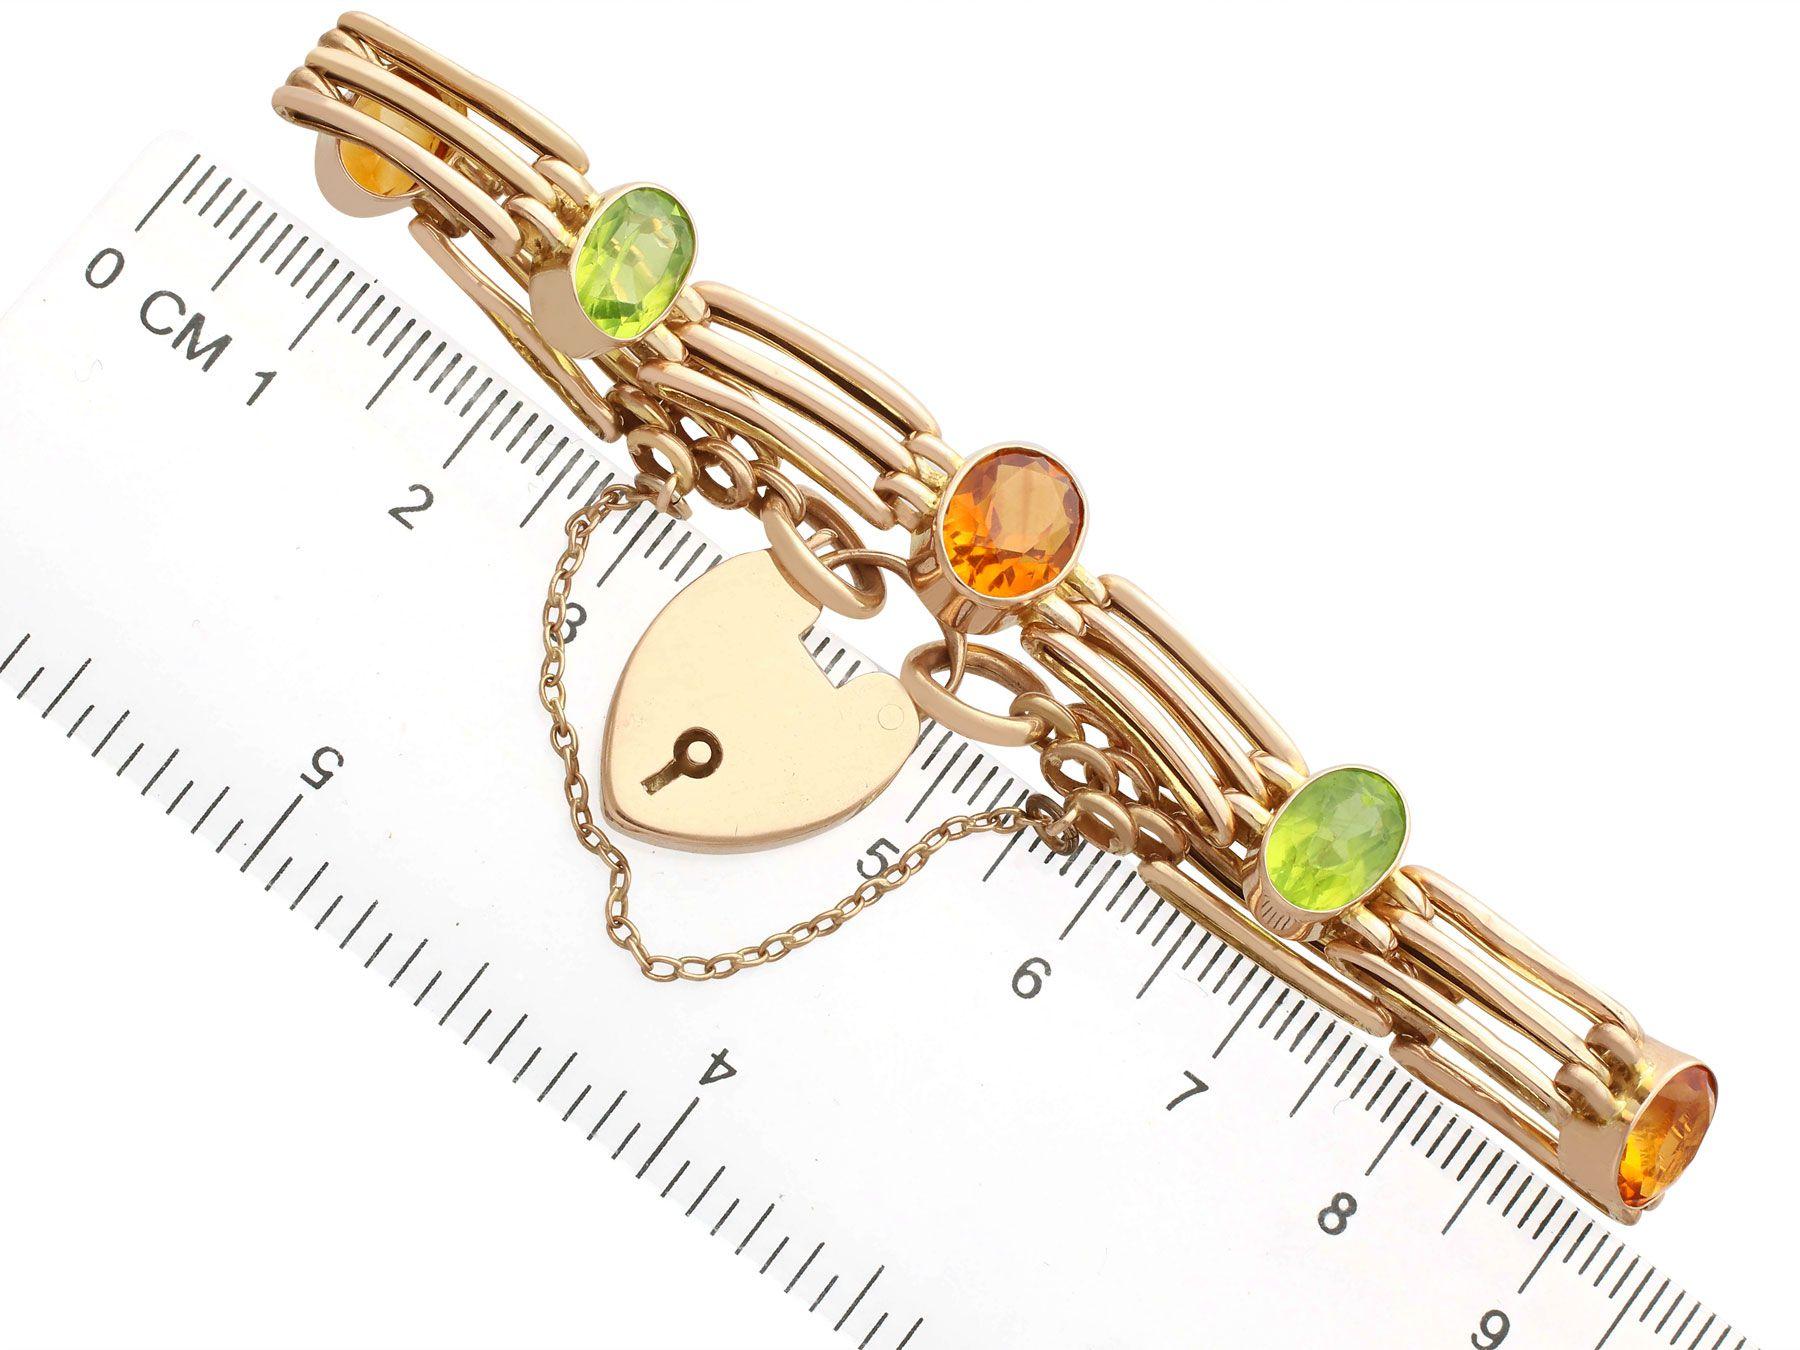 Antique 5.19 Carat Citrine and 3.72 Carat Peridot Yellow Gold Gate Bracelet For Sale 1